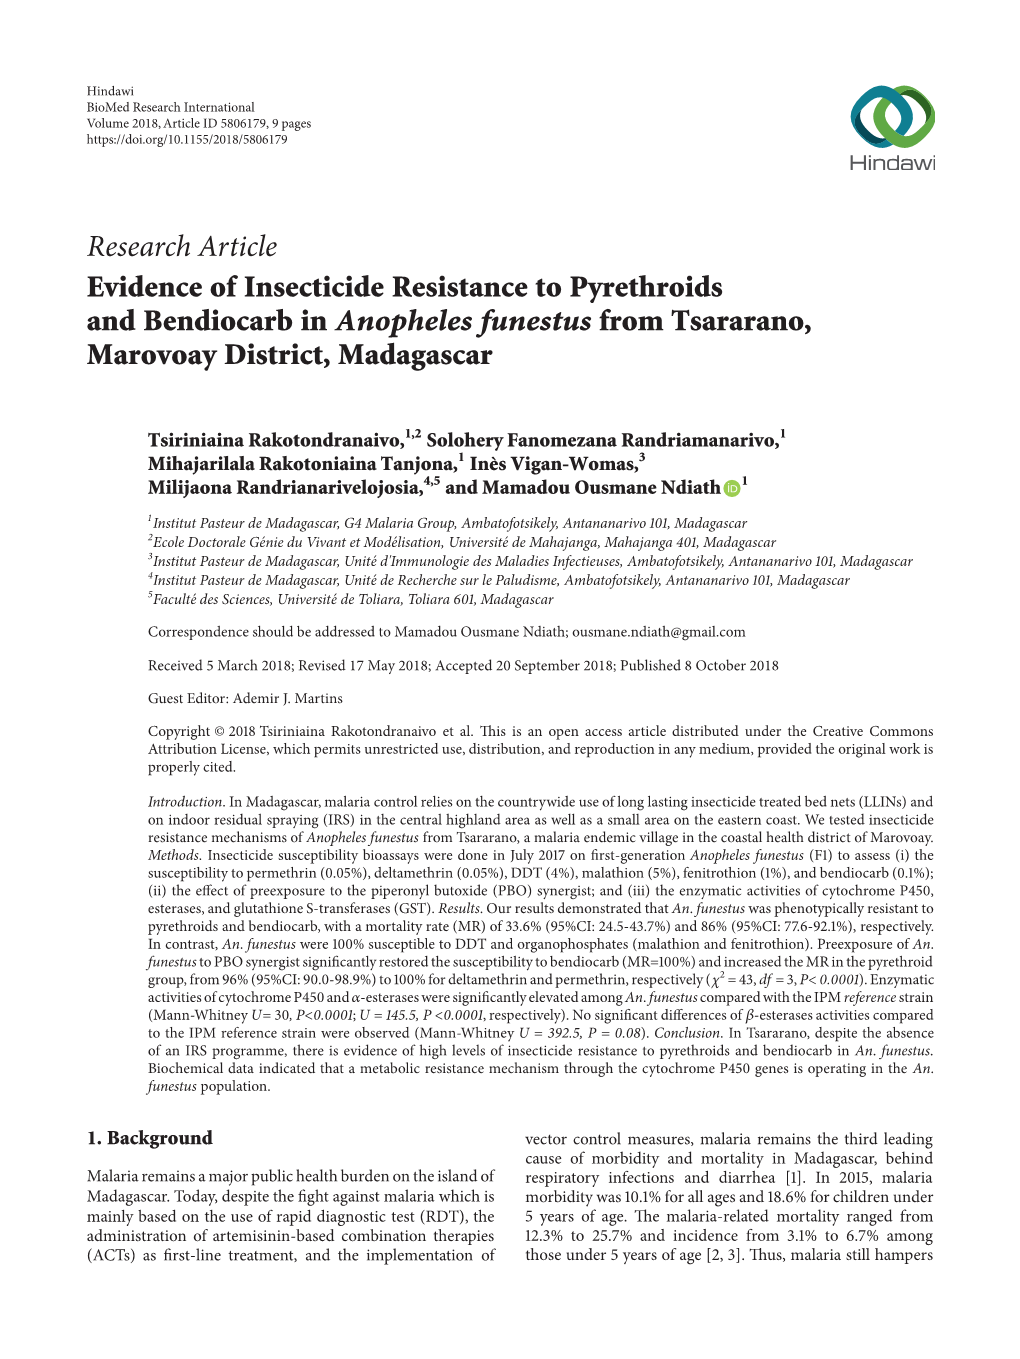 Evidence of Insecticide Resistance to Pyrethroids and Bendiocarb in Anopheles Funestus from Tsararano, Marovoay District, Madagascar